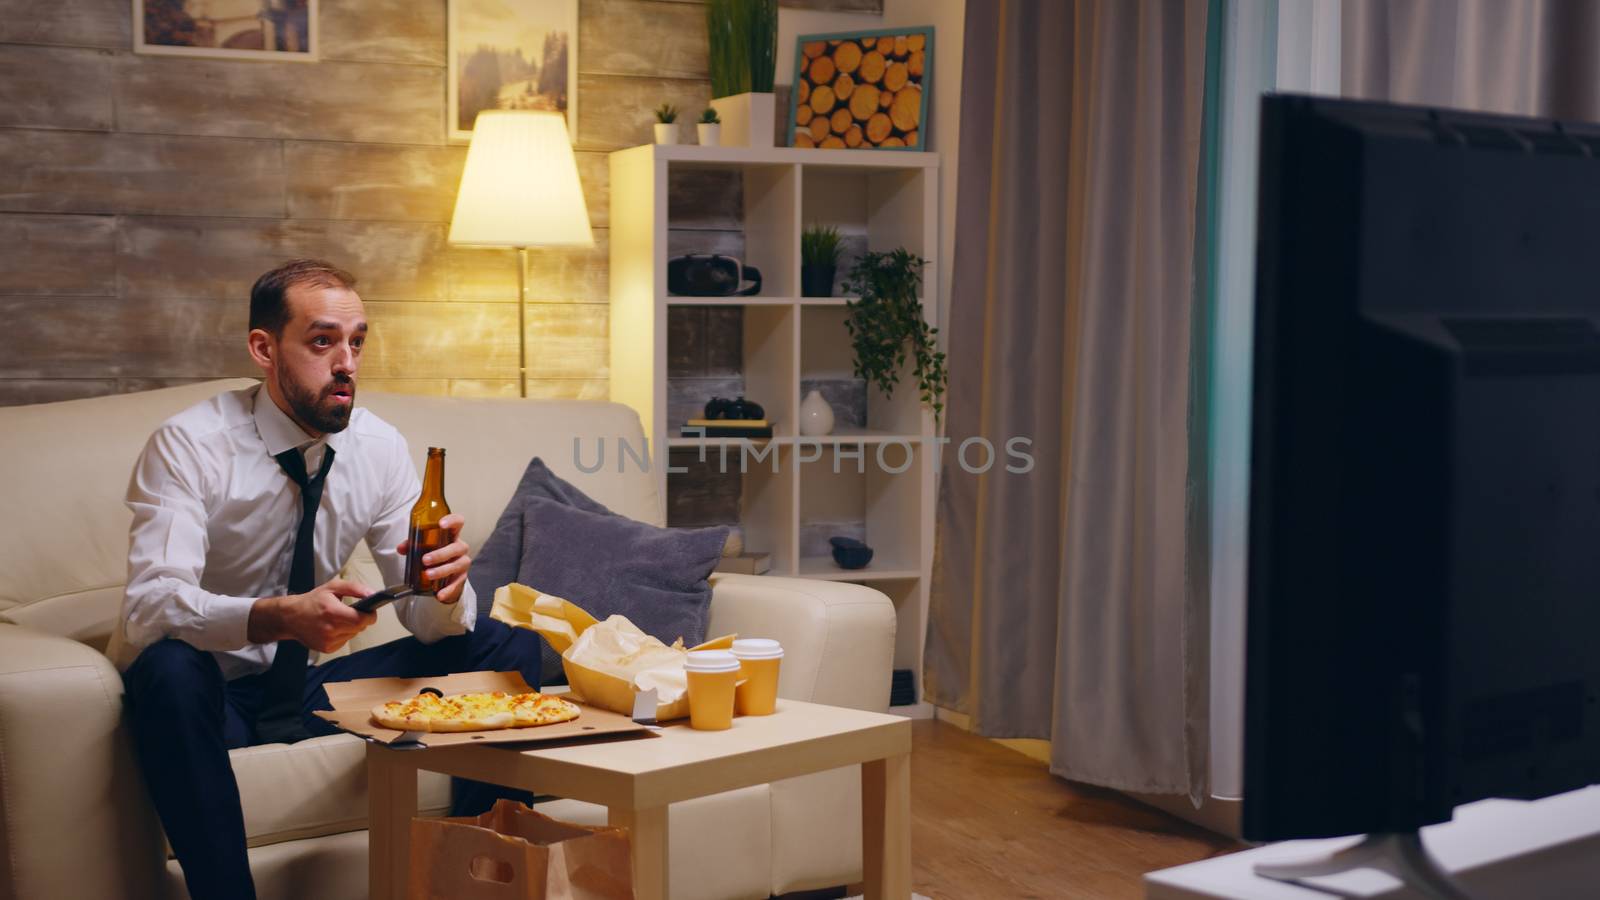 Businessman with tie arriving at home with pizza after work. Beer in front of tv.